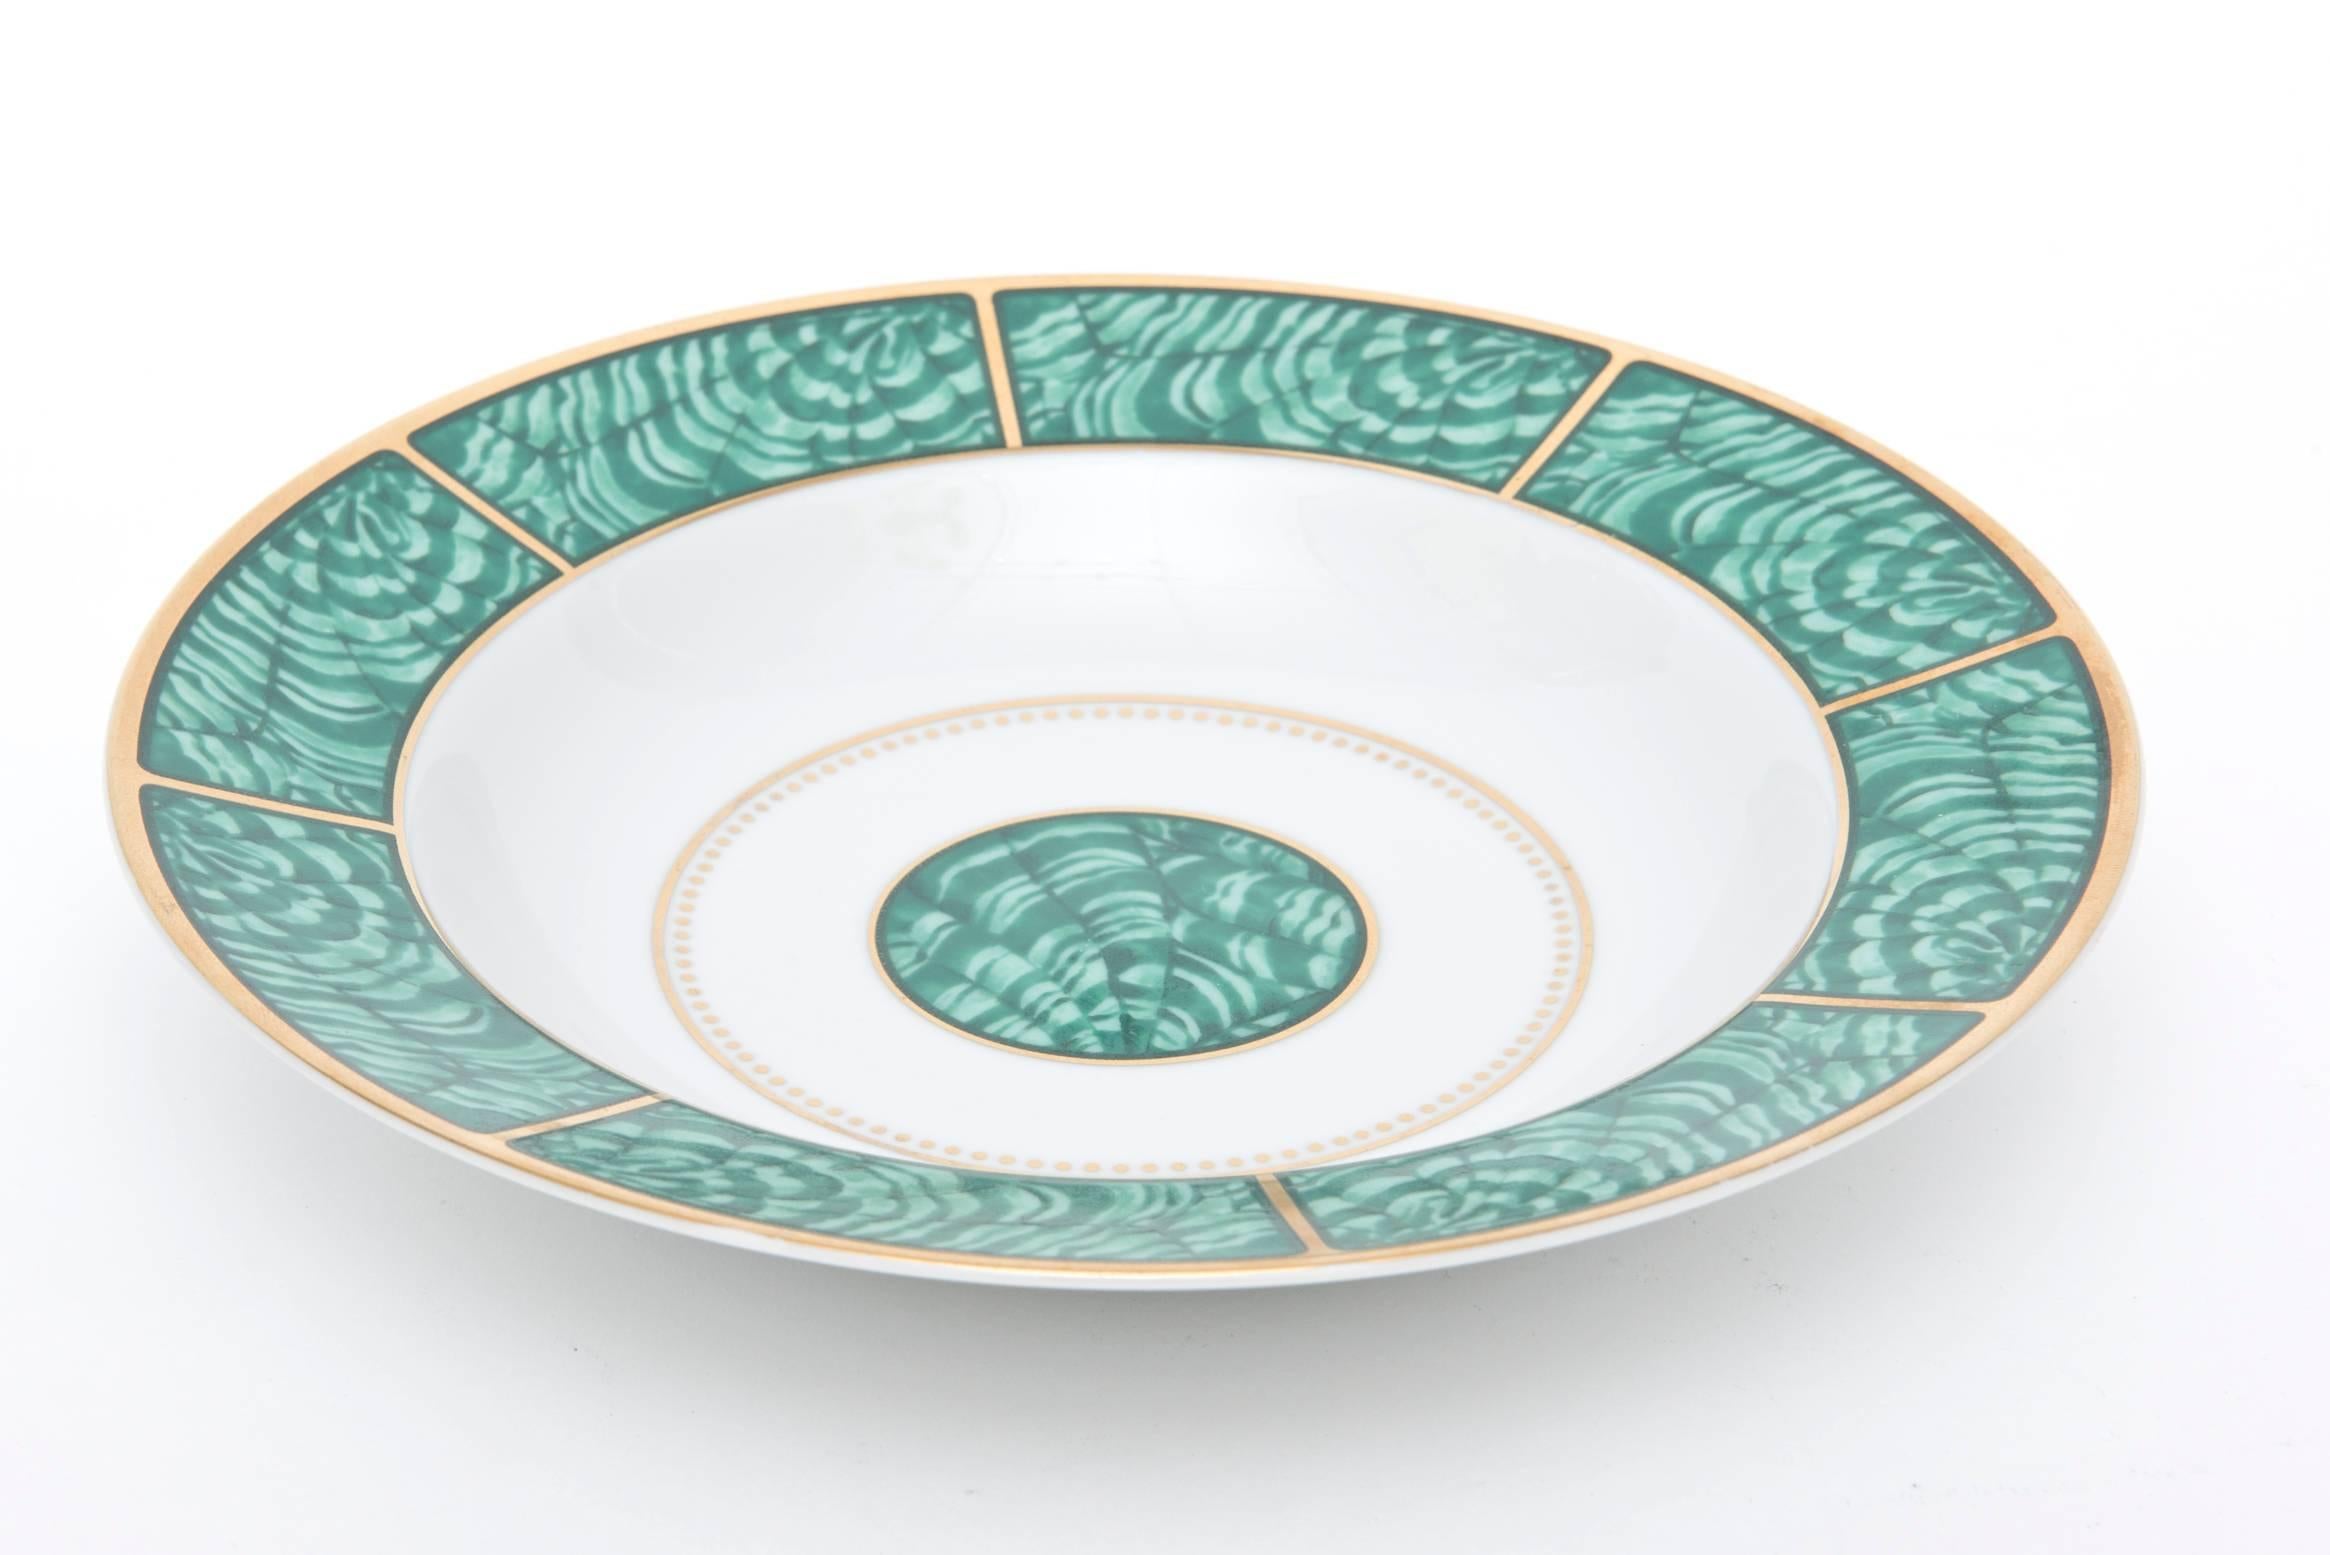 The beautiful design of malachite rings with gold and white in this very imperial looking porcelain china service for four made by Georges Briard vintage from the 1960s. It consists of a dinner plate, salad or desert plate, soup or salad bowl and